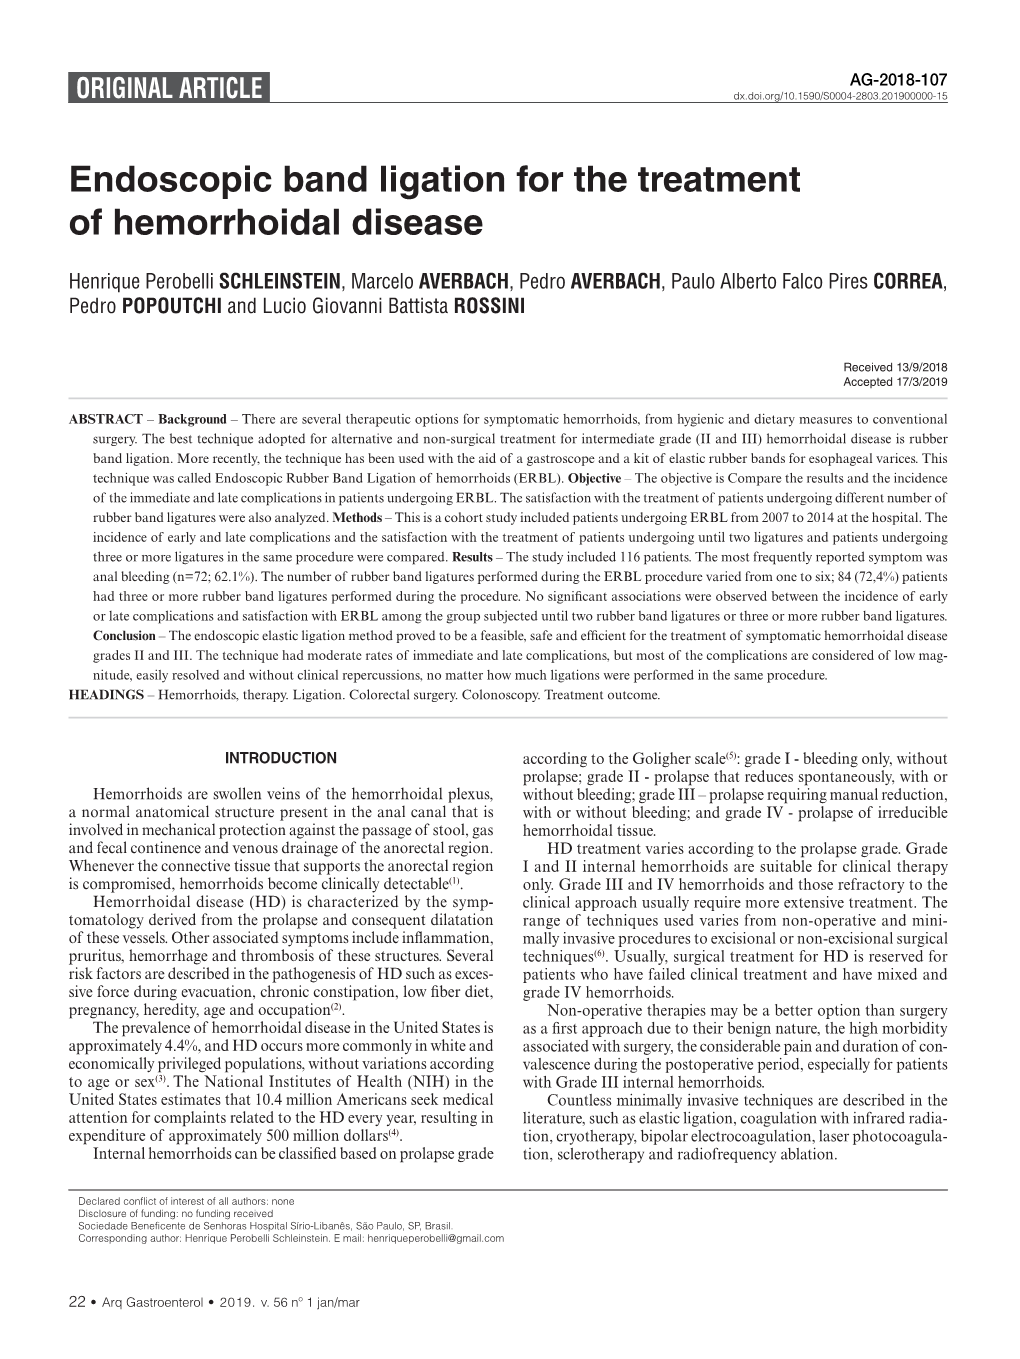 Endoscopic Band Ligation for the Treatment of Hemorrhoidal Disease